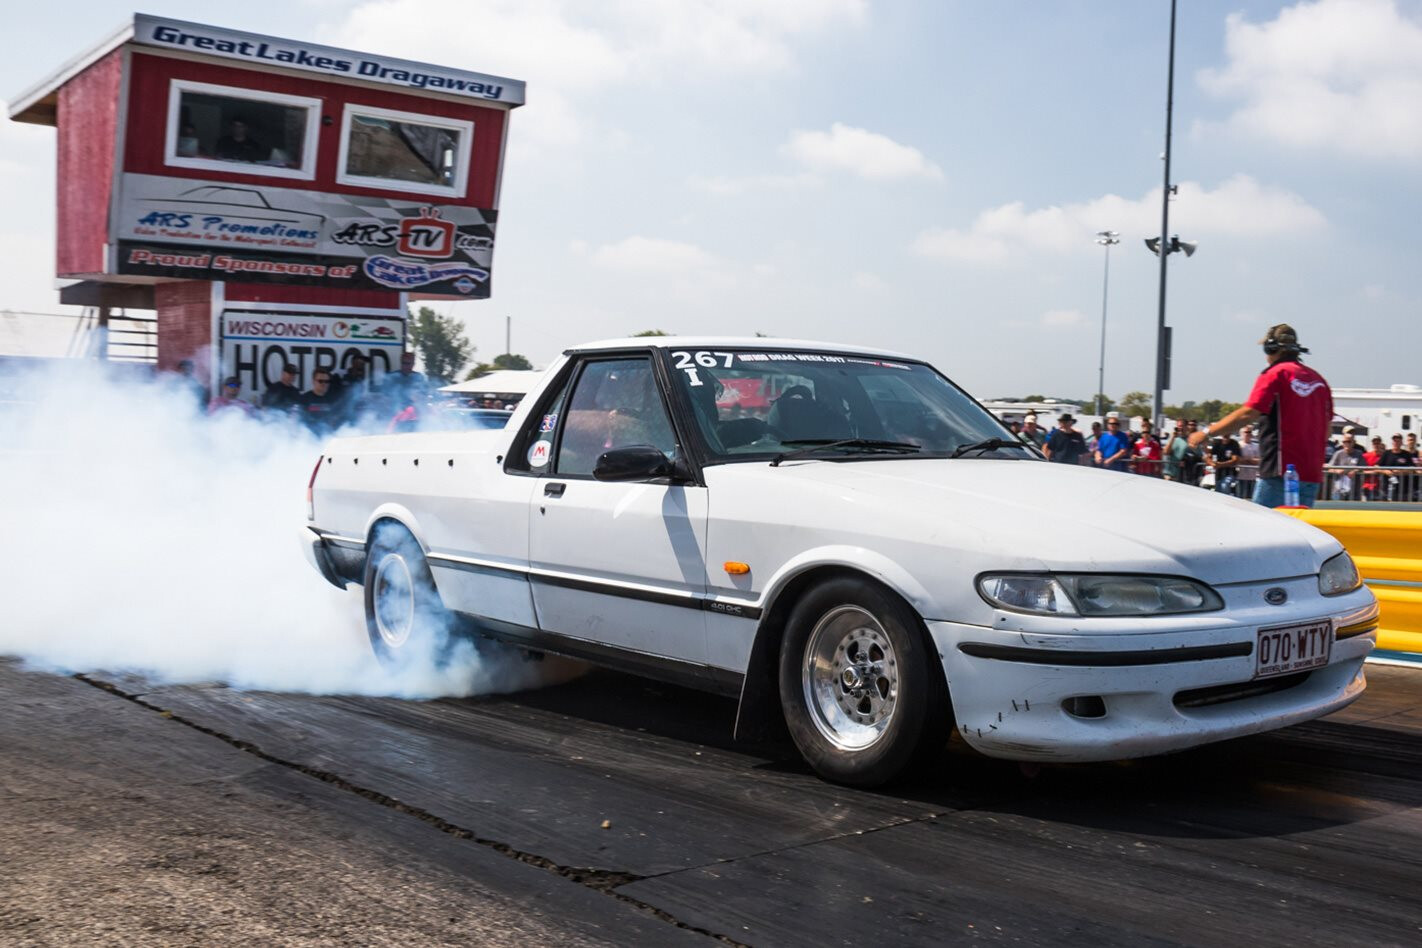 DRAG WEEK DAY FOUR- THE MOVIE